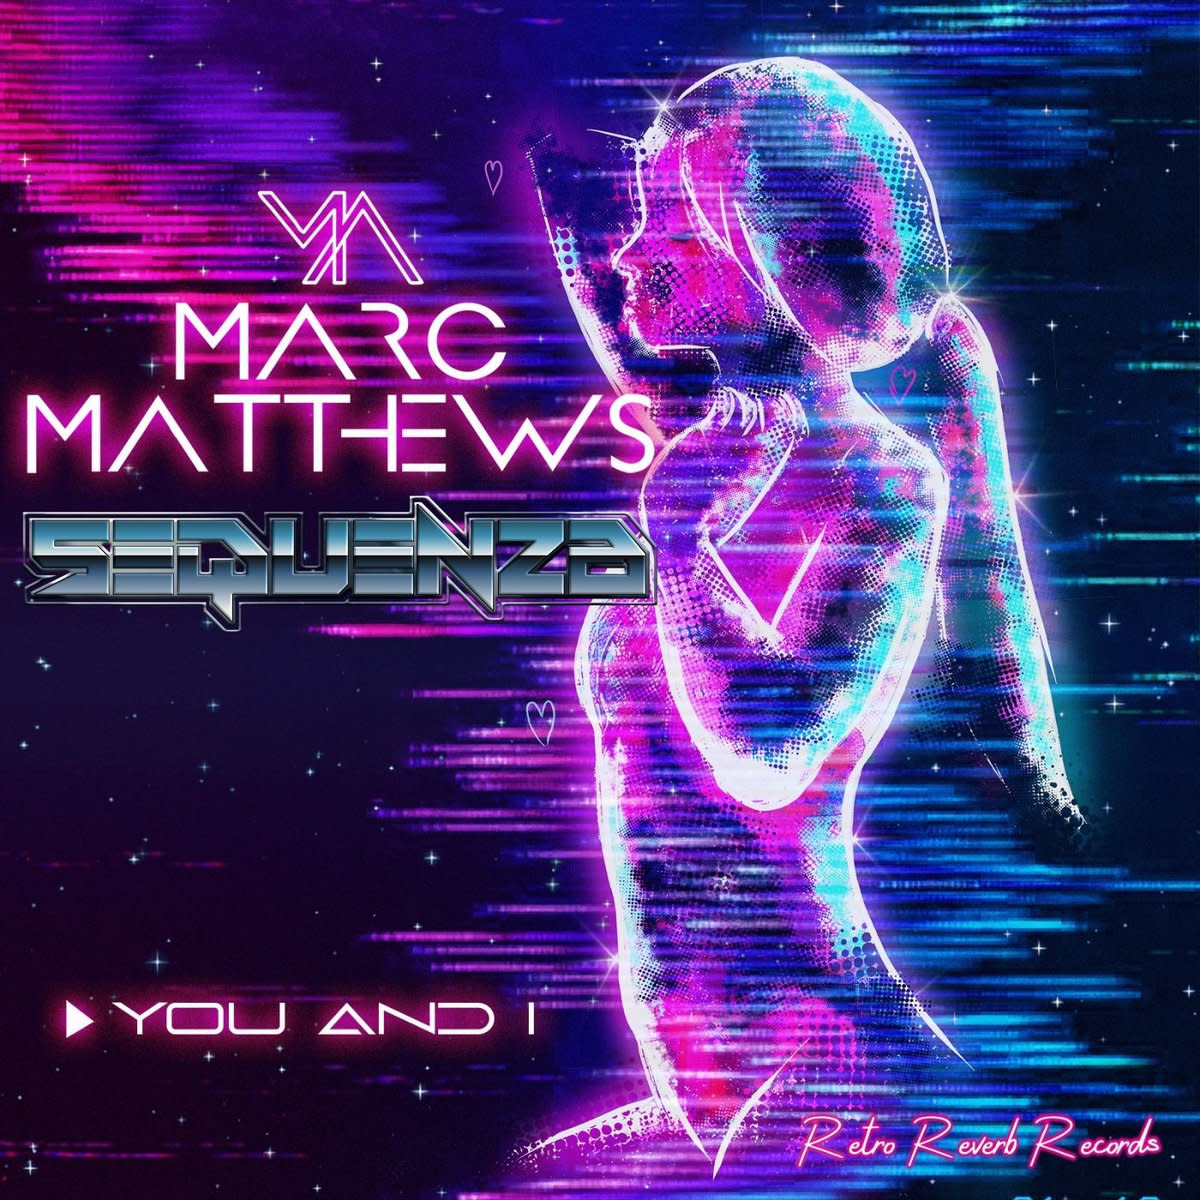 synth-single-review-you-i-remix-by-sequenza-marc-matthews